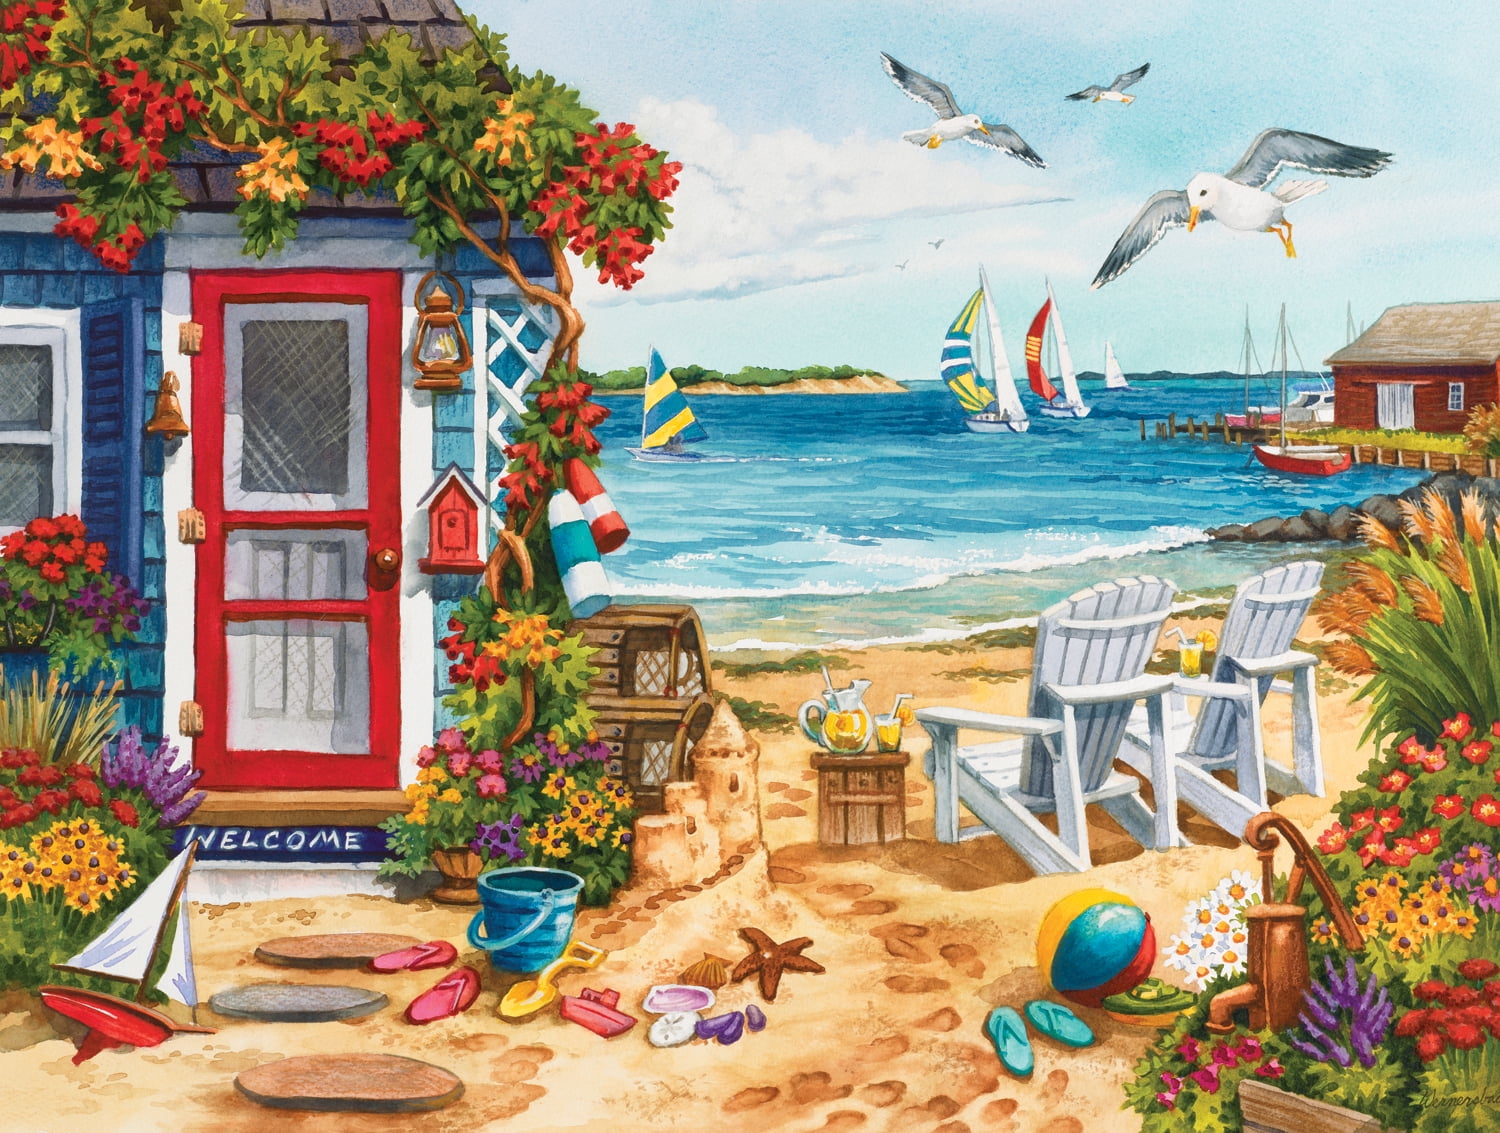 1000 Pieces of Interesting Jigsaw Puzzle Large Oil Painting Jigsaw BUYT Seaside Landscape Wooden Jigsaw Puzzle